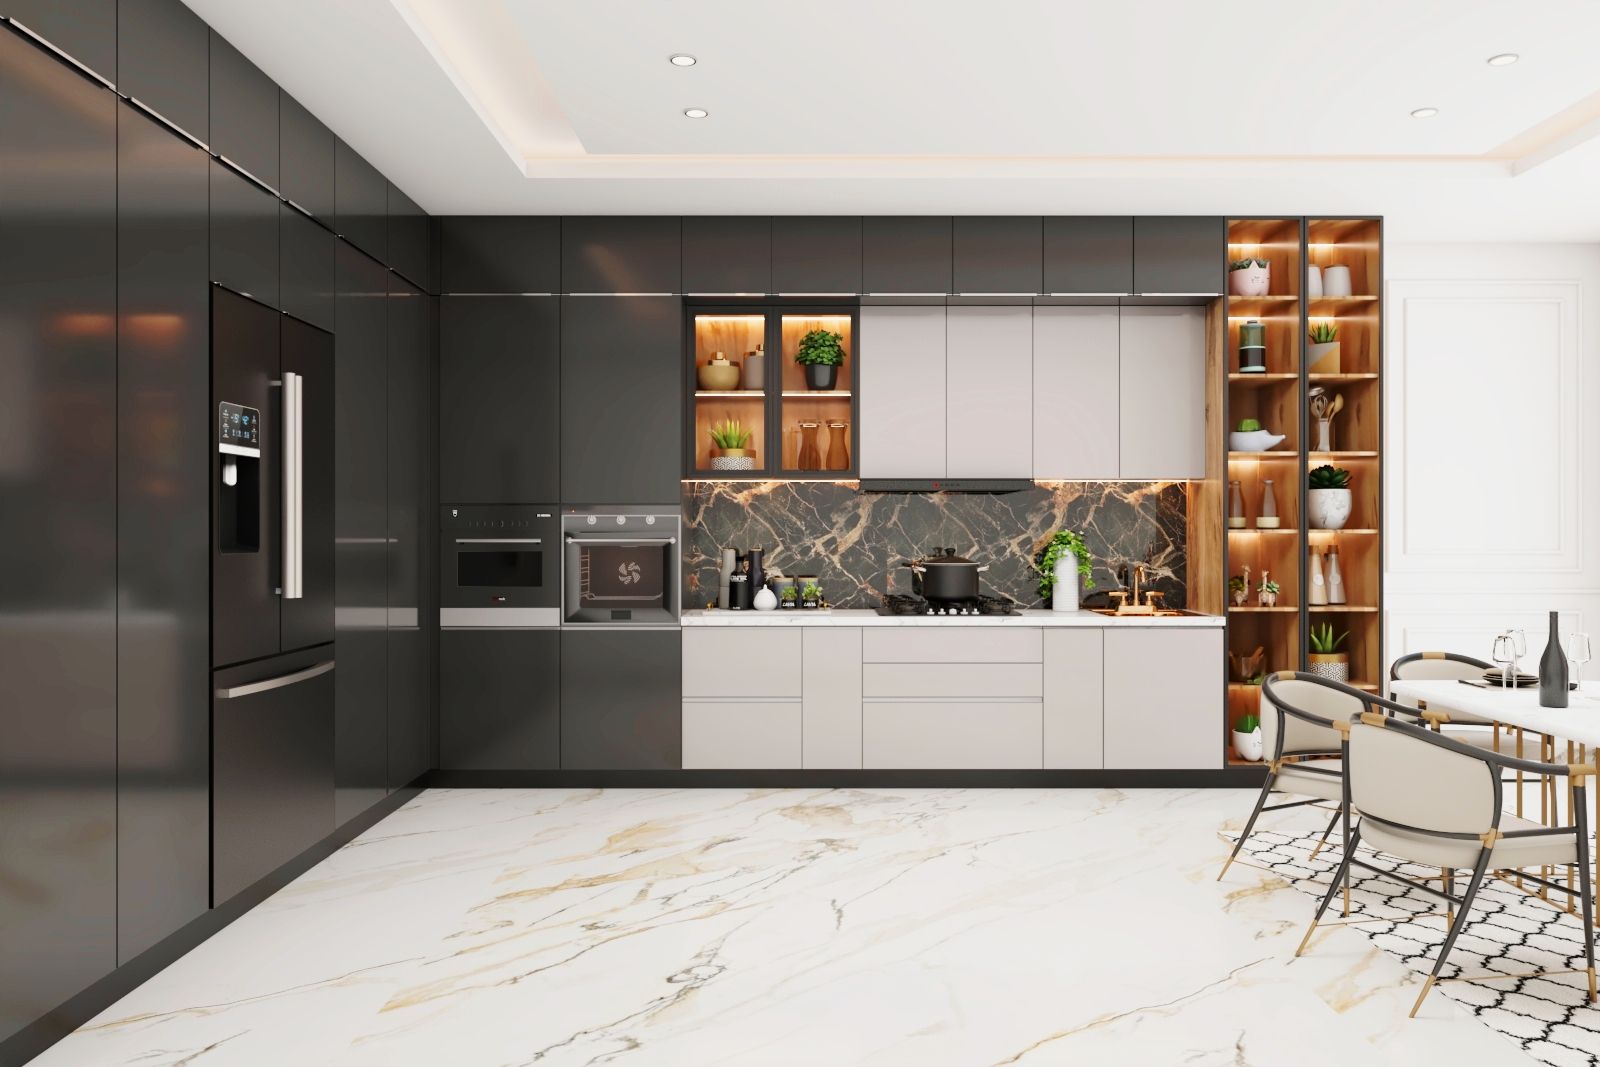 Contemporary Black And White L-Shaped Kitchen Design With Wooden Storage Units